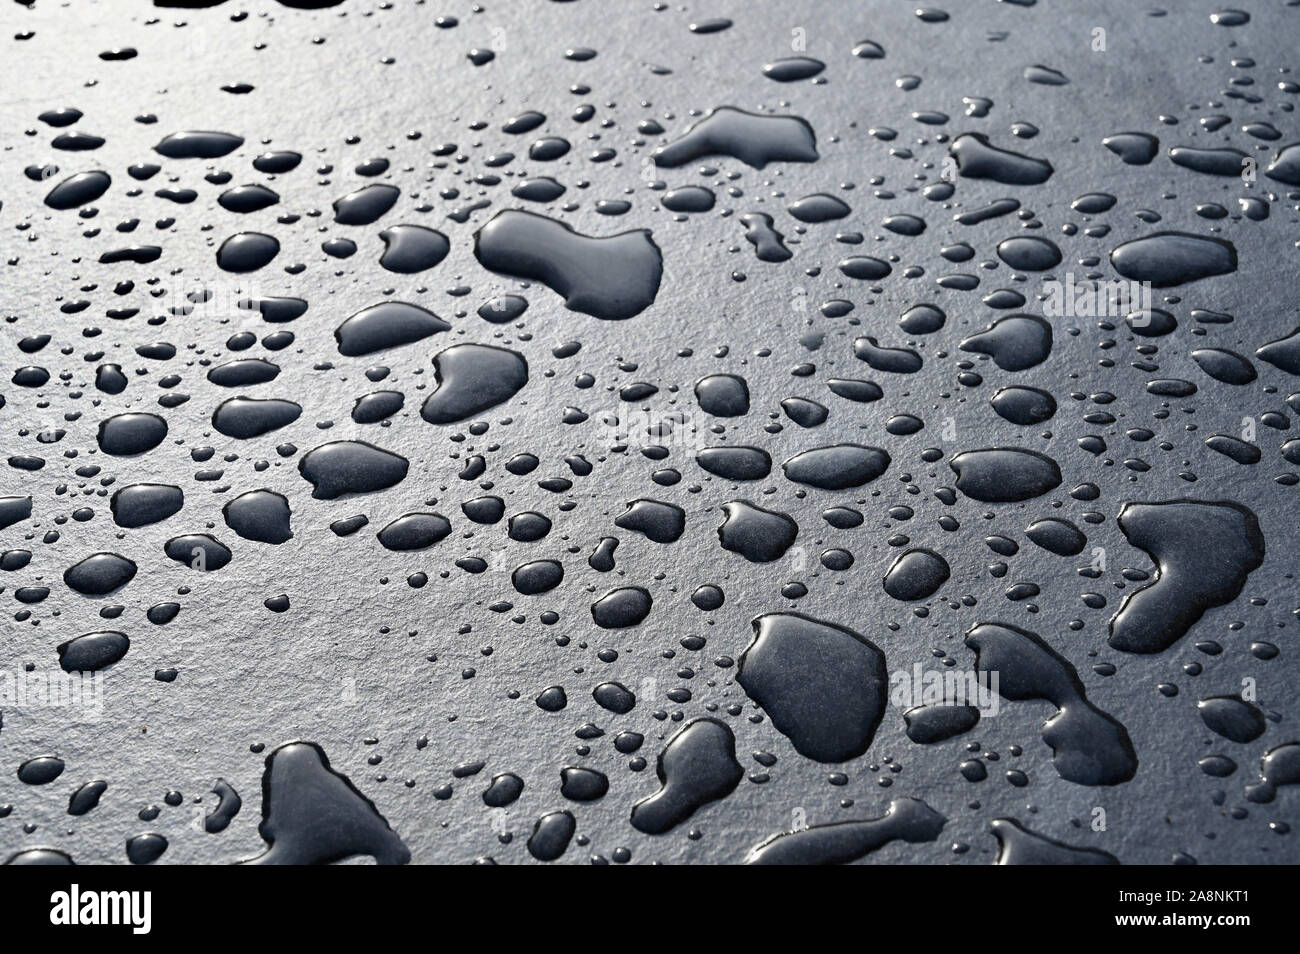 Drops of water against a black background. Stock Photo